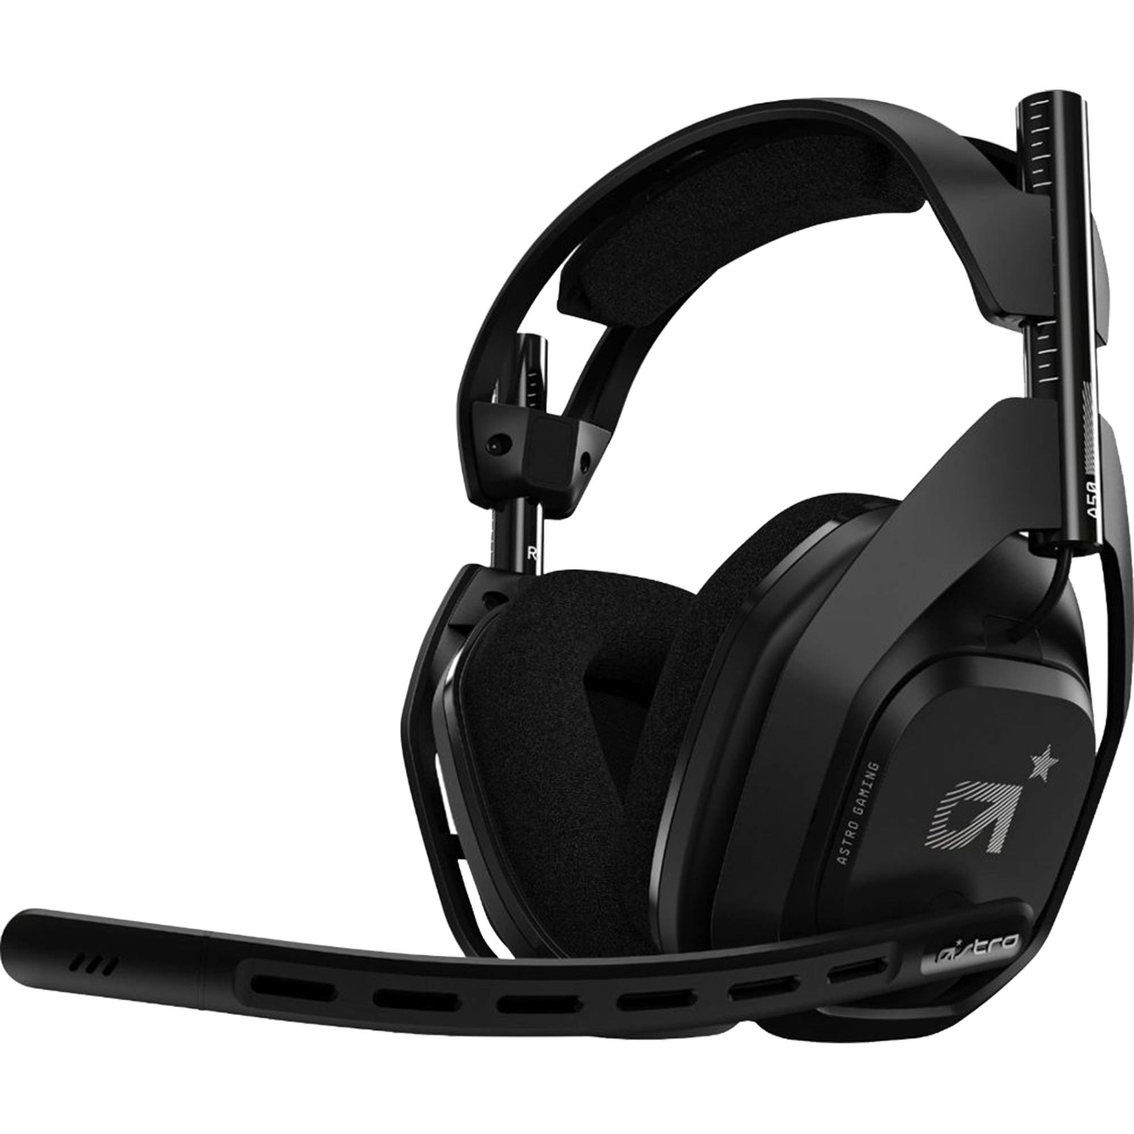 Astro A50 Headset And Base Station, Black (ps4) | Headphones Microphones | Electronics | Shop The Exchange